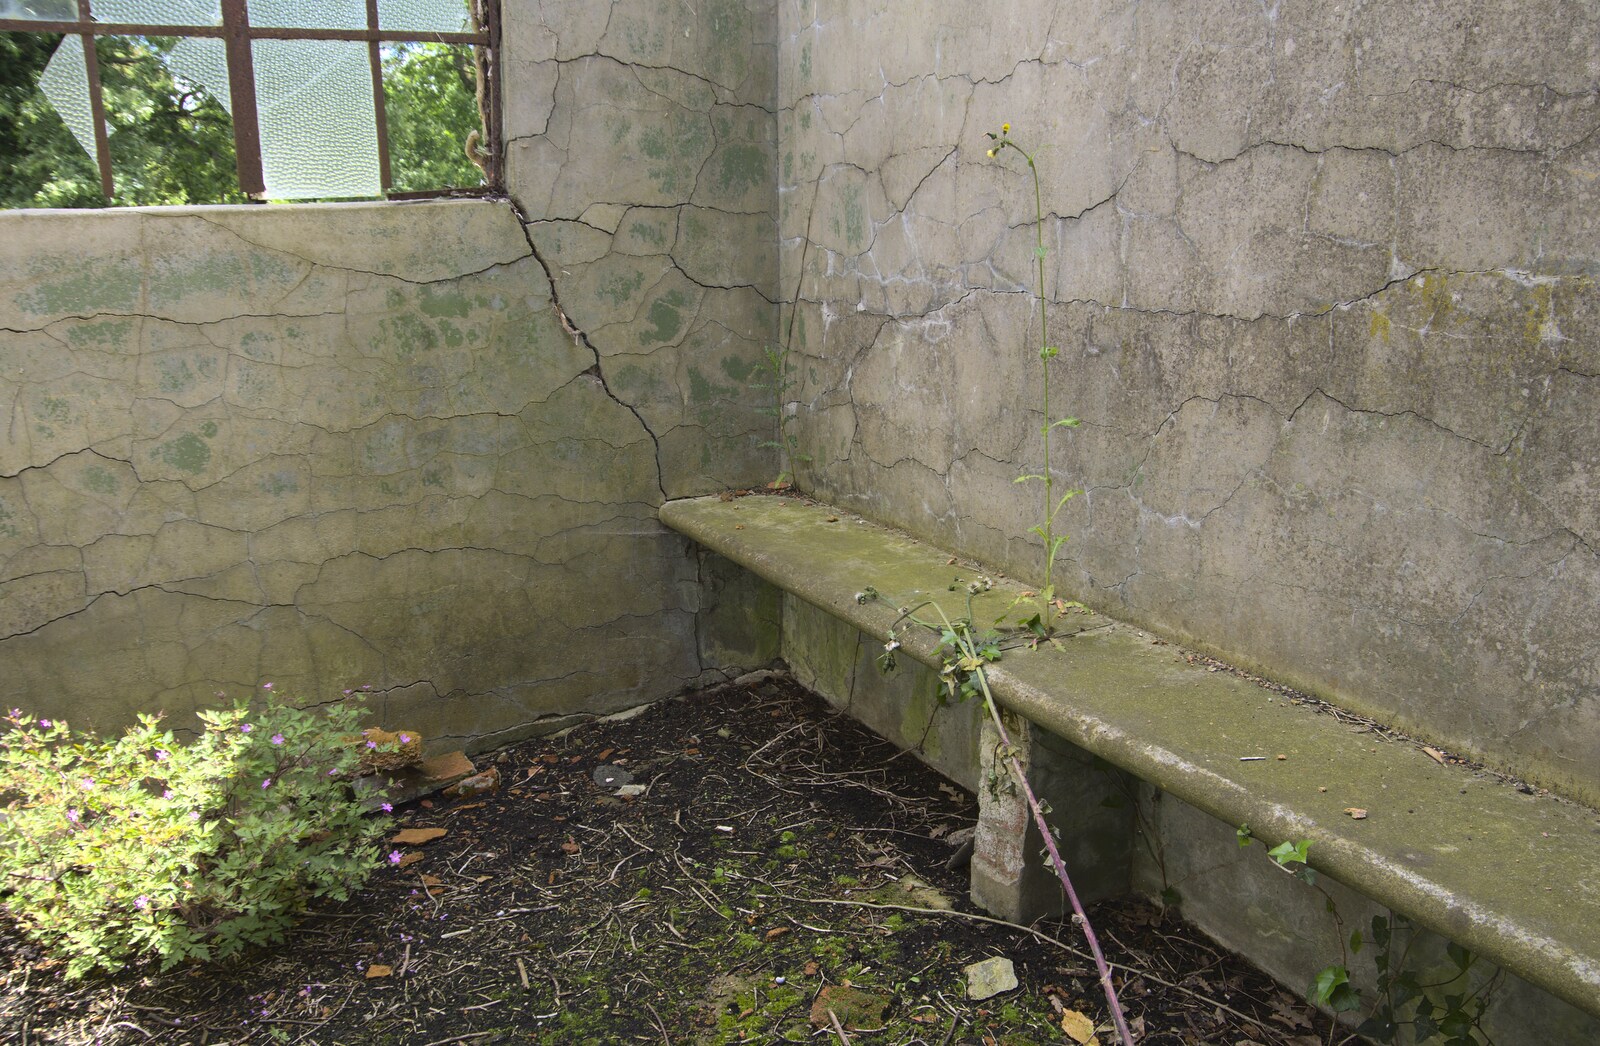 Part of a large shower block from A 1940s Timewarp, Site 4, Bungay Airfield, Flixton, Suffolk - 9th June 2022